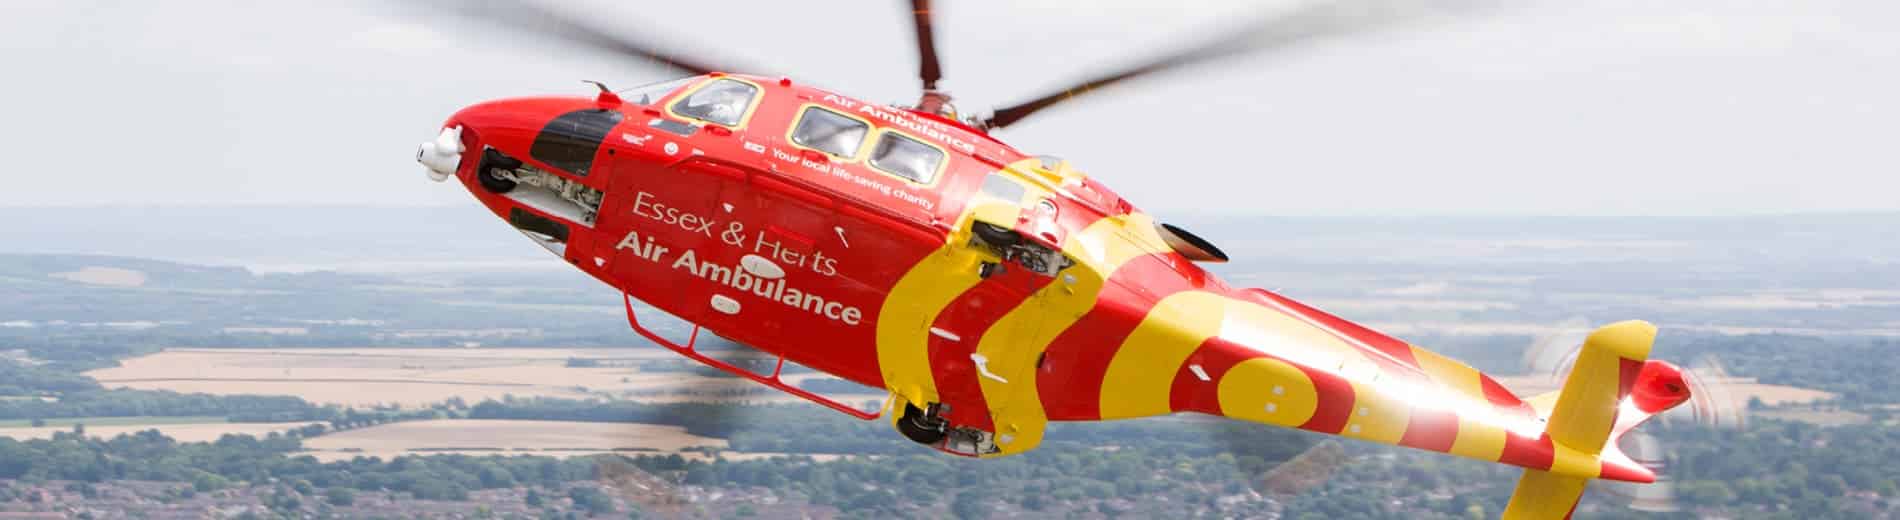 Essex & Herts Air Ambulance reaches shortlist for AAUK awards of excellence